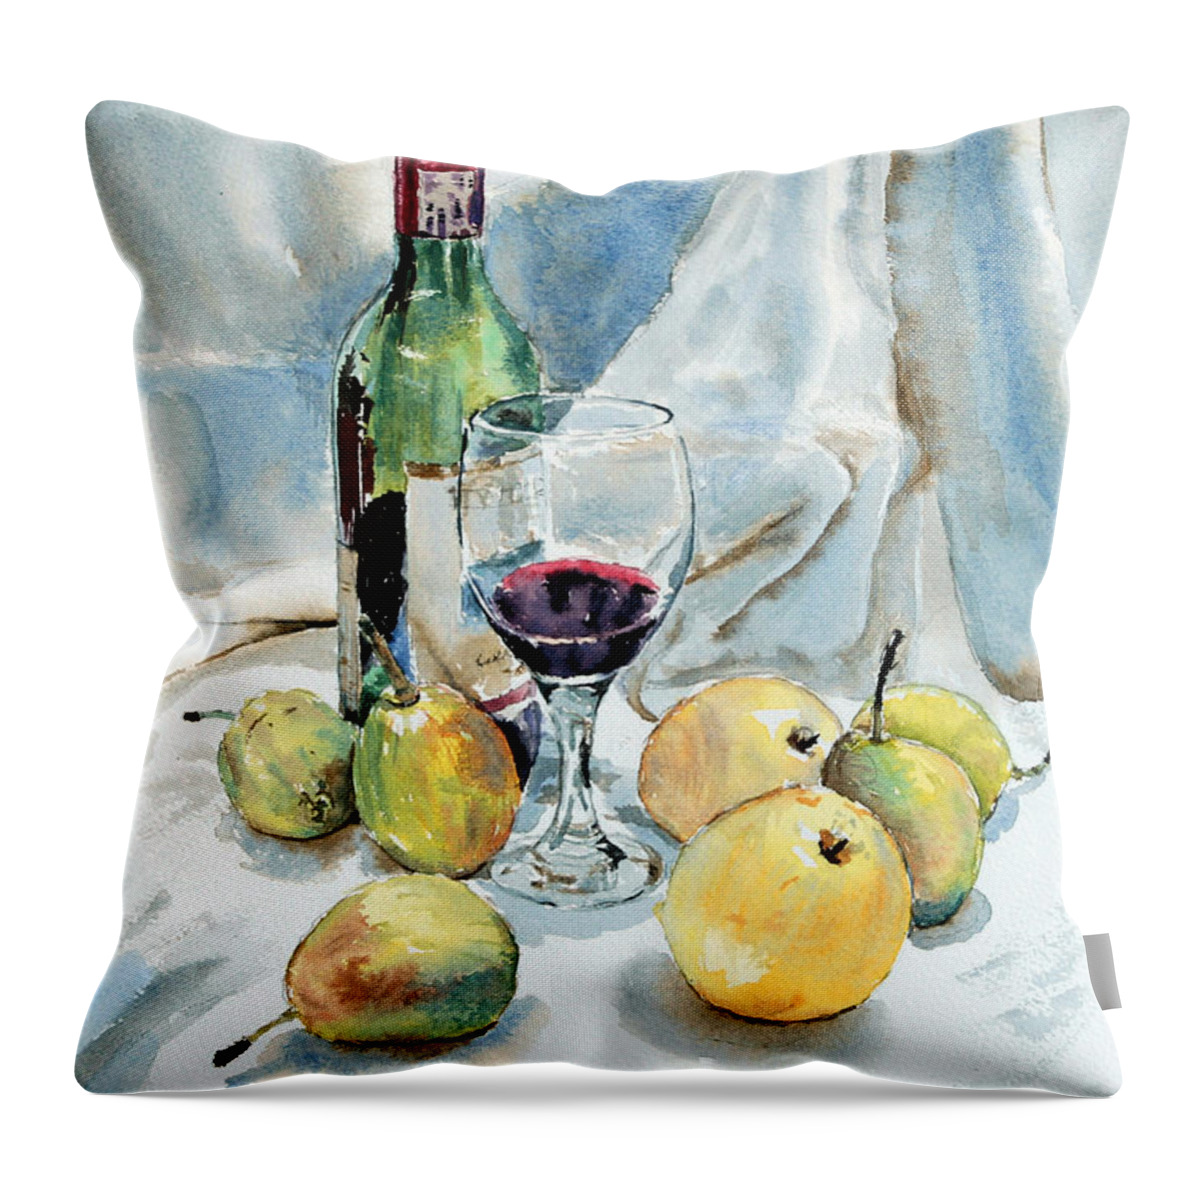 Pears Throw Pillow featuring the painting Pears and Wine by Joey Agbayani